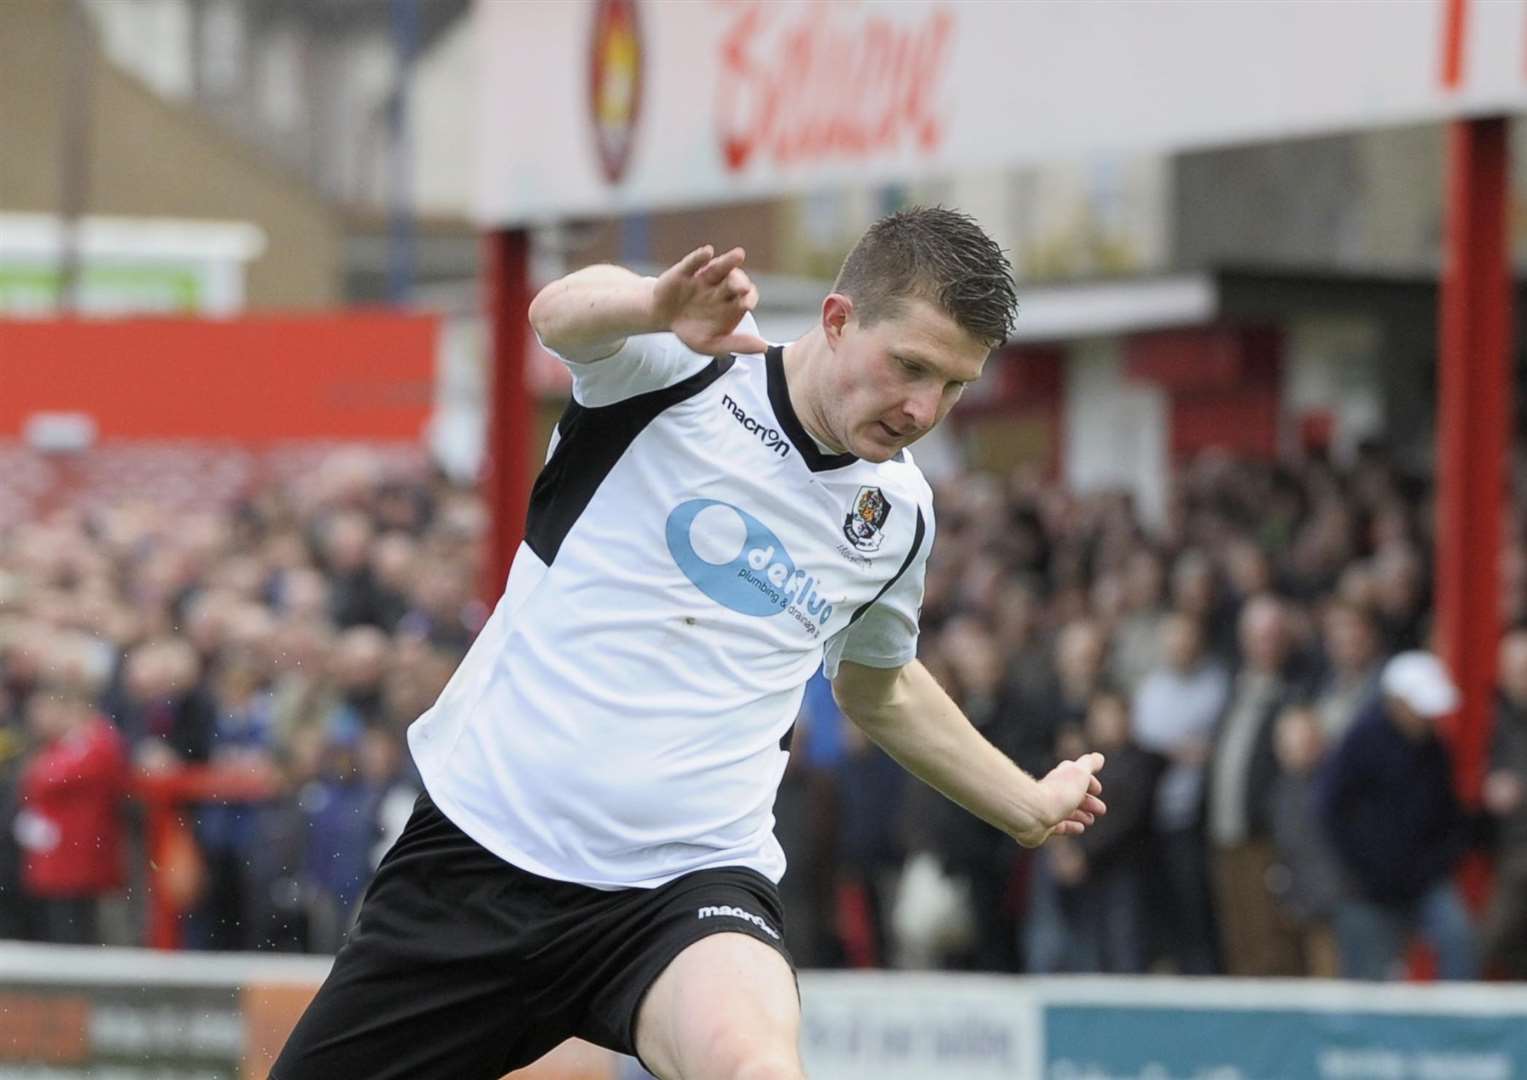 Matt Fry in action for Dartford in 2013. Picture: Andy Payton